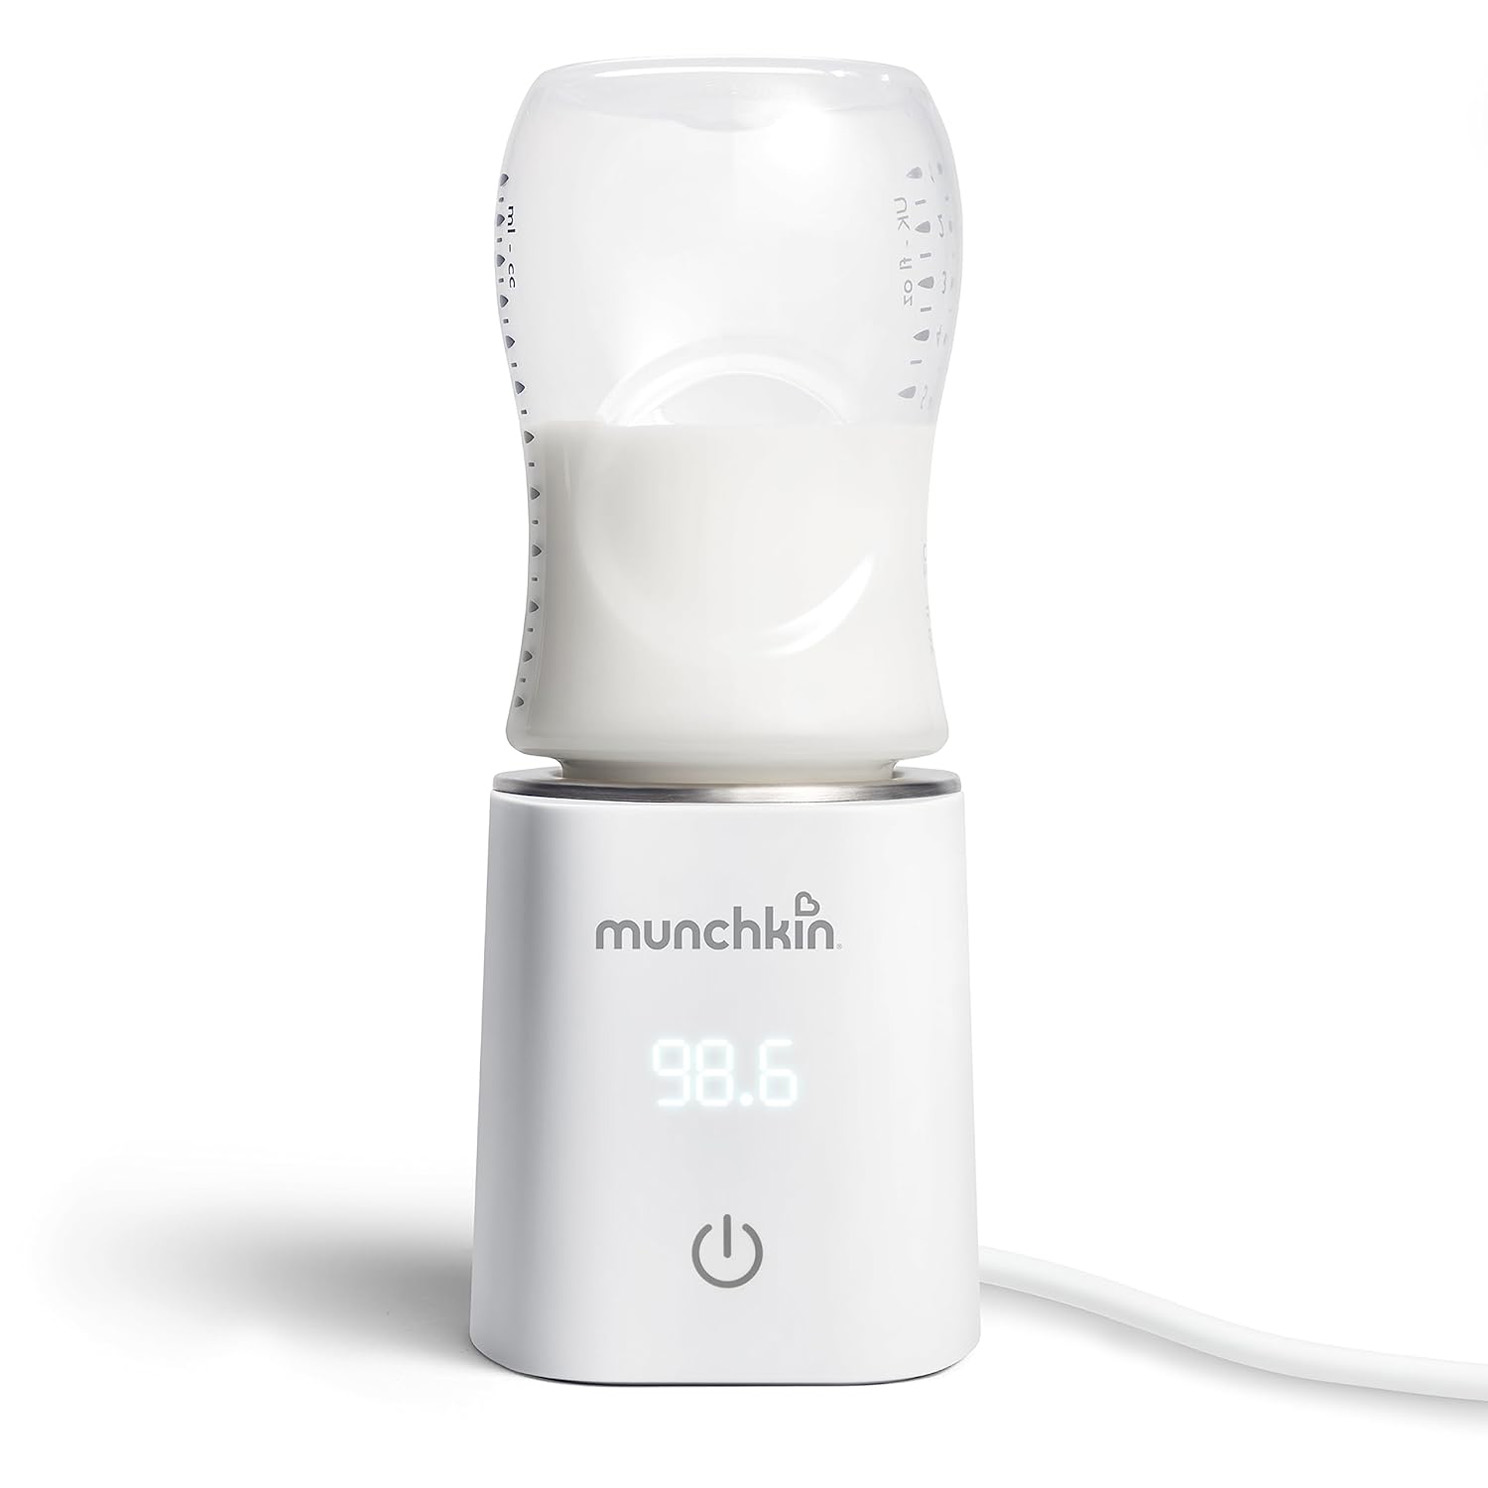 Munchkin 98° Digital Bottle Warmer Perfect Temperature Every Time, Plug-In, White